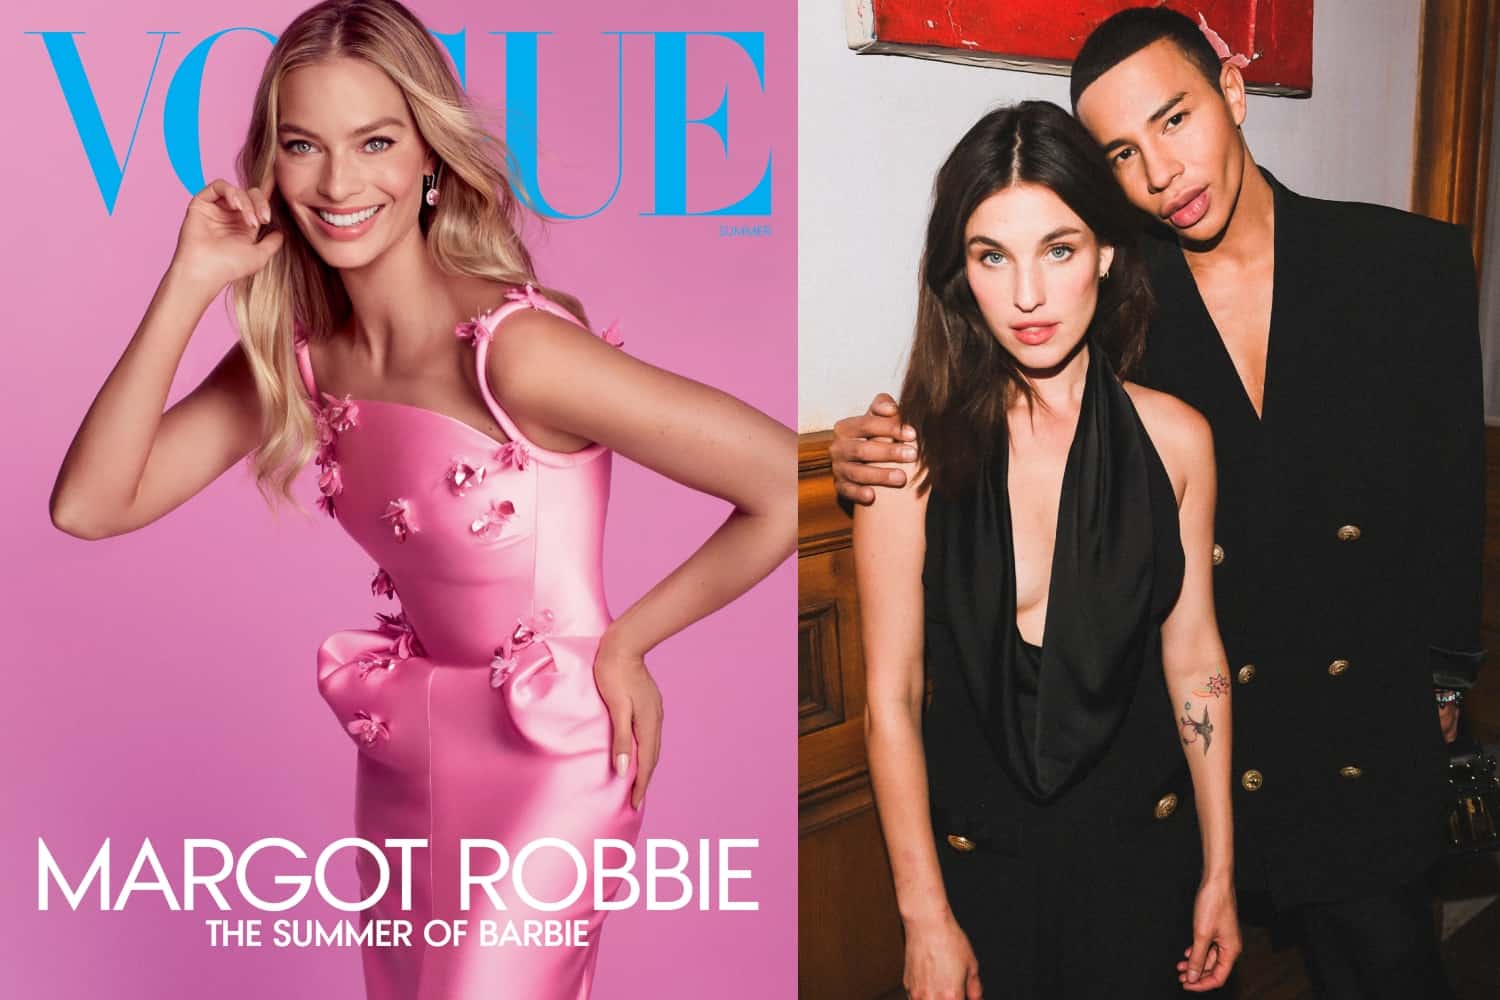 margot-robbie-is-vogue’s-summer-cover-girl,-olivier-rousteing-showcases-balmain-pre-fall-’23-at-hotel-chelsea,-dua-lipa-covers-dazed,-and-more!